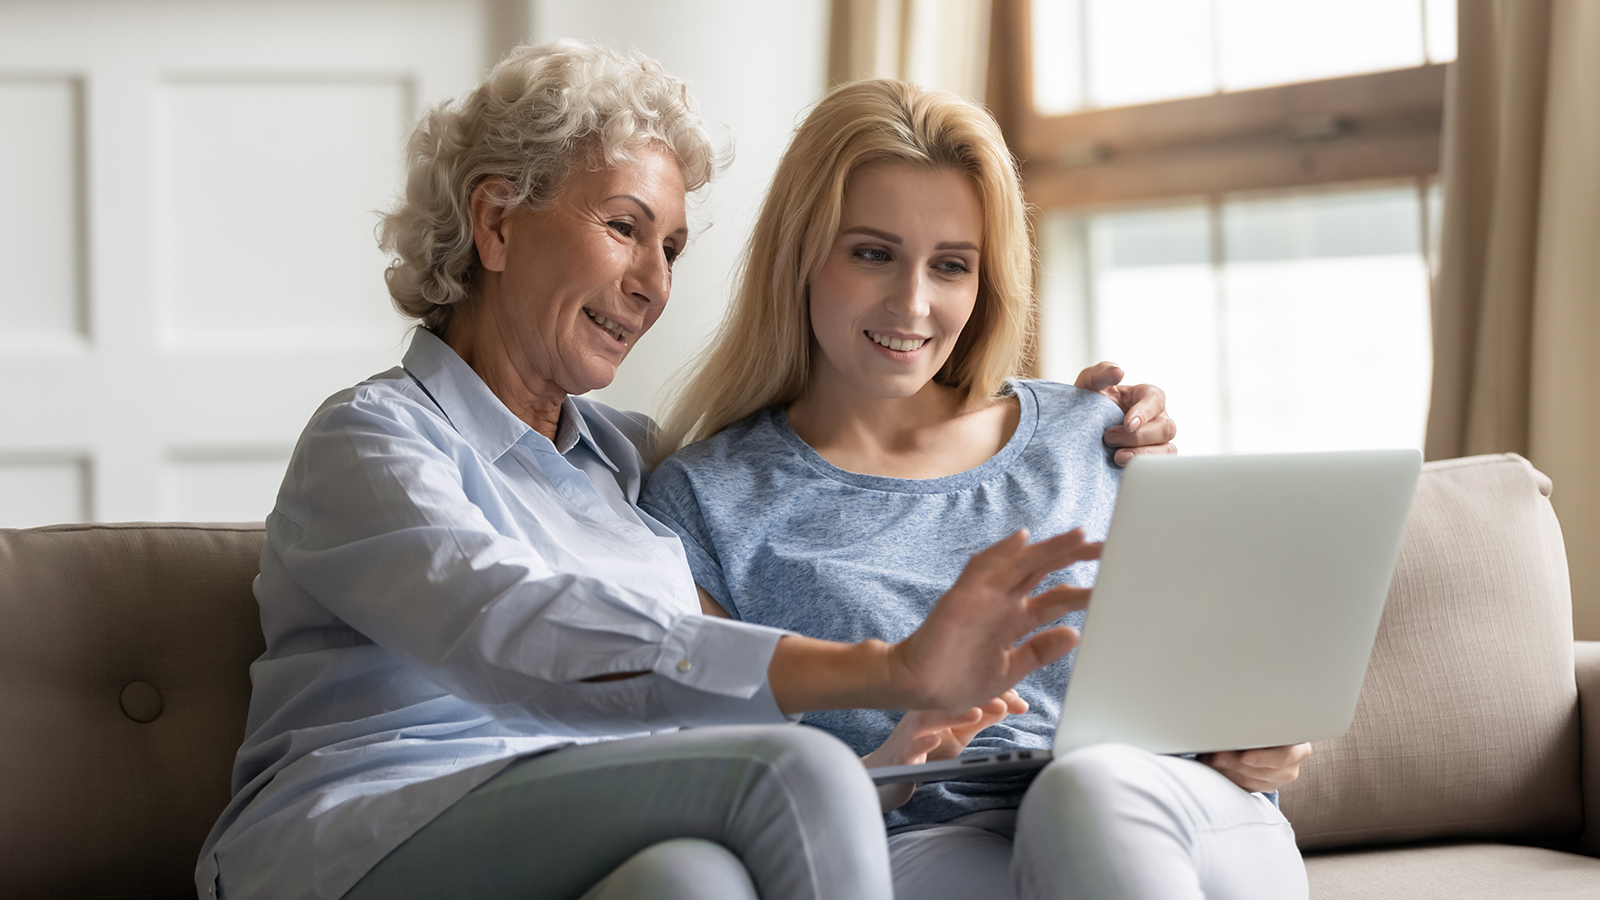 Happy older mature woman cuddling attractive grownup daughter, using computer at home. Smiling young lady teaching elderly mother use applications on laptop, shopping online, sitting together on sofa.